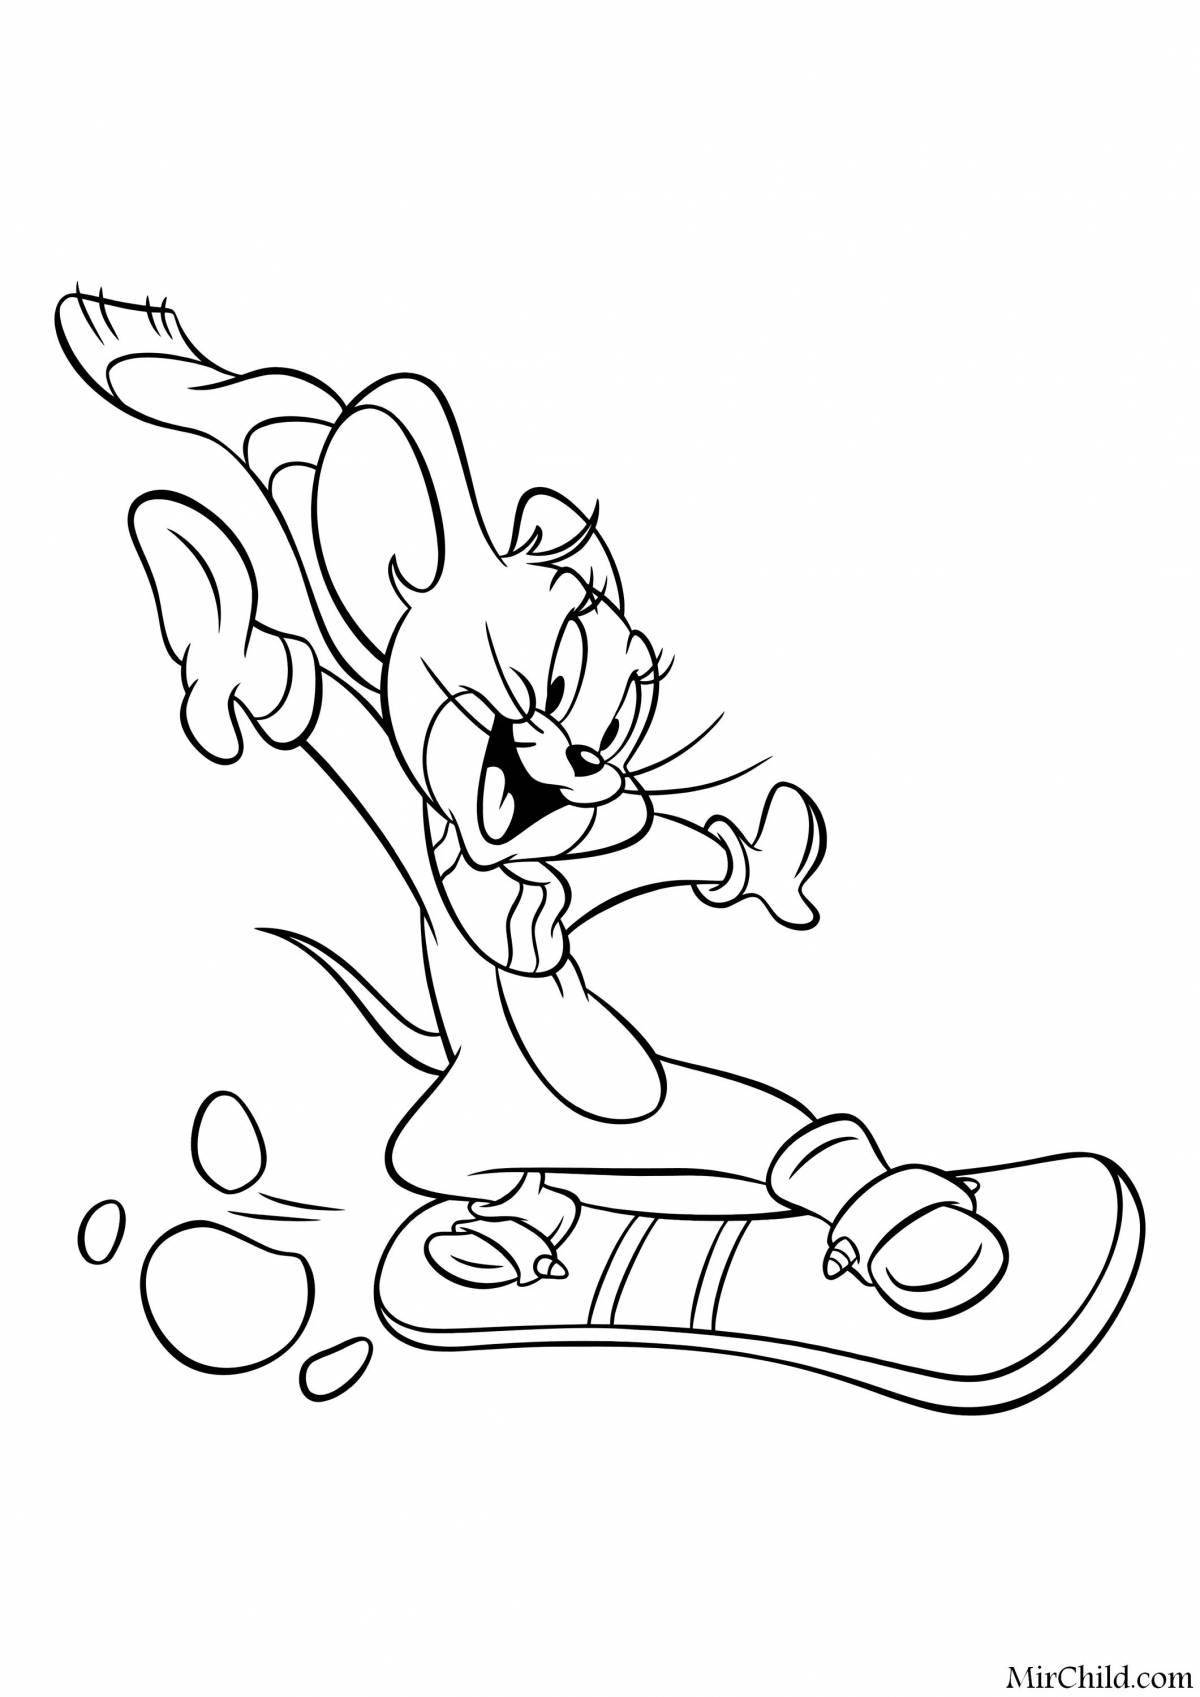 Jolly tom and jerry coloring book